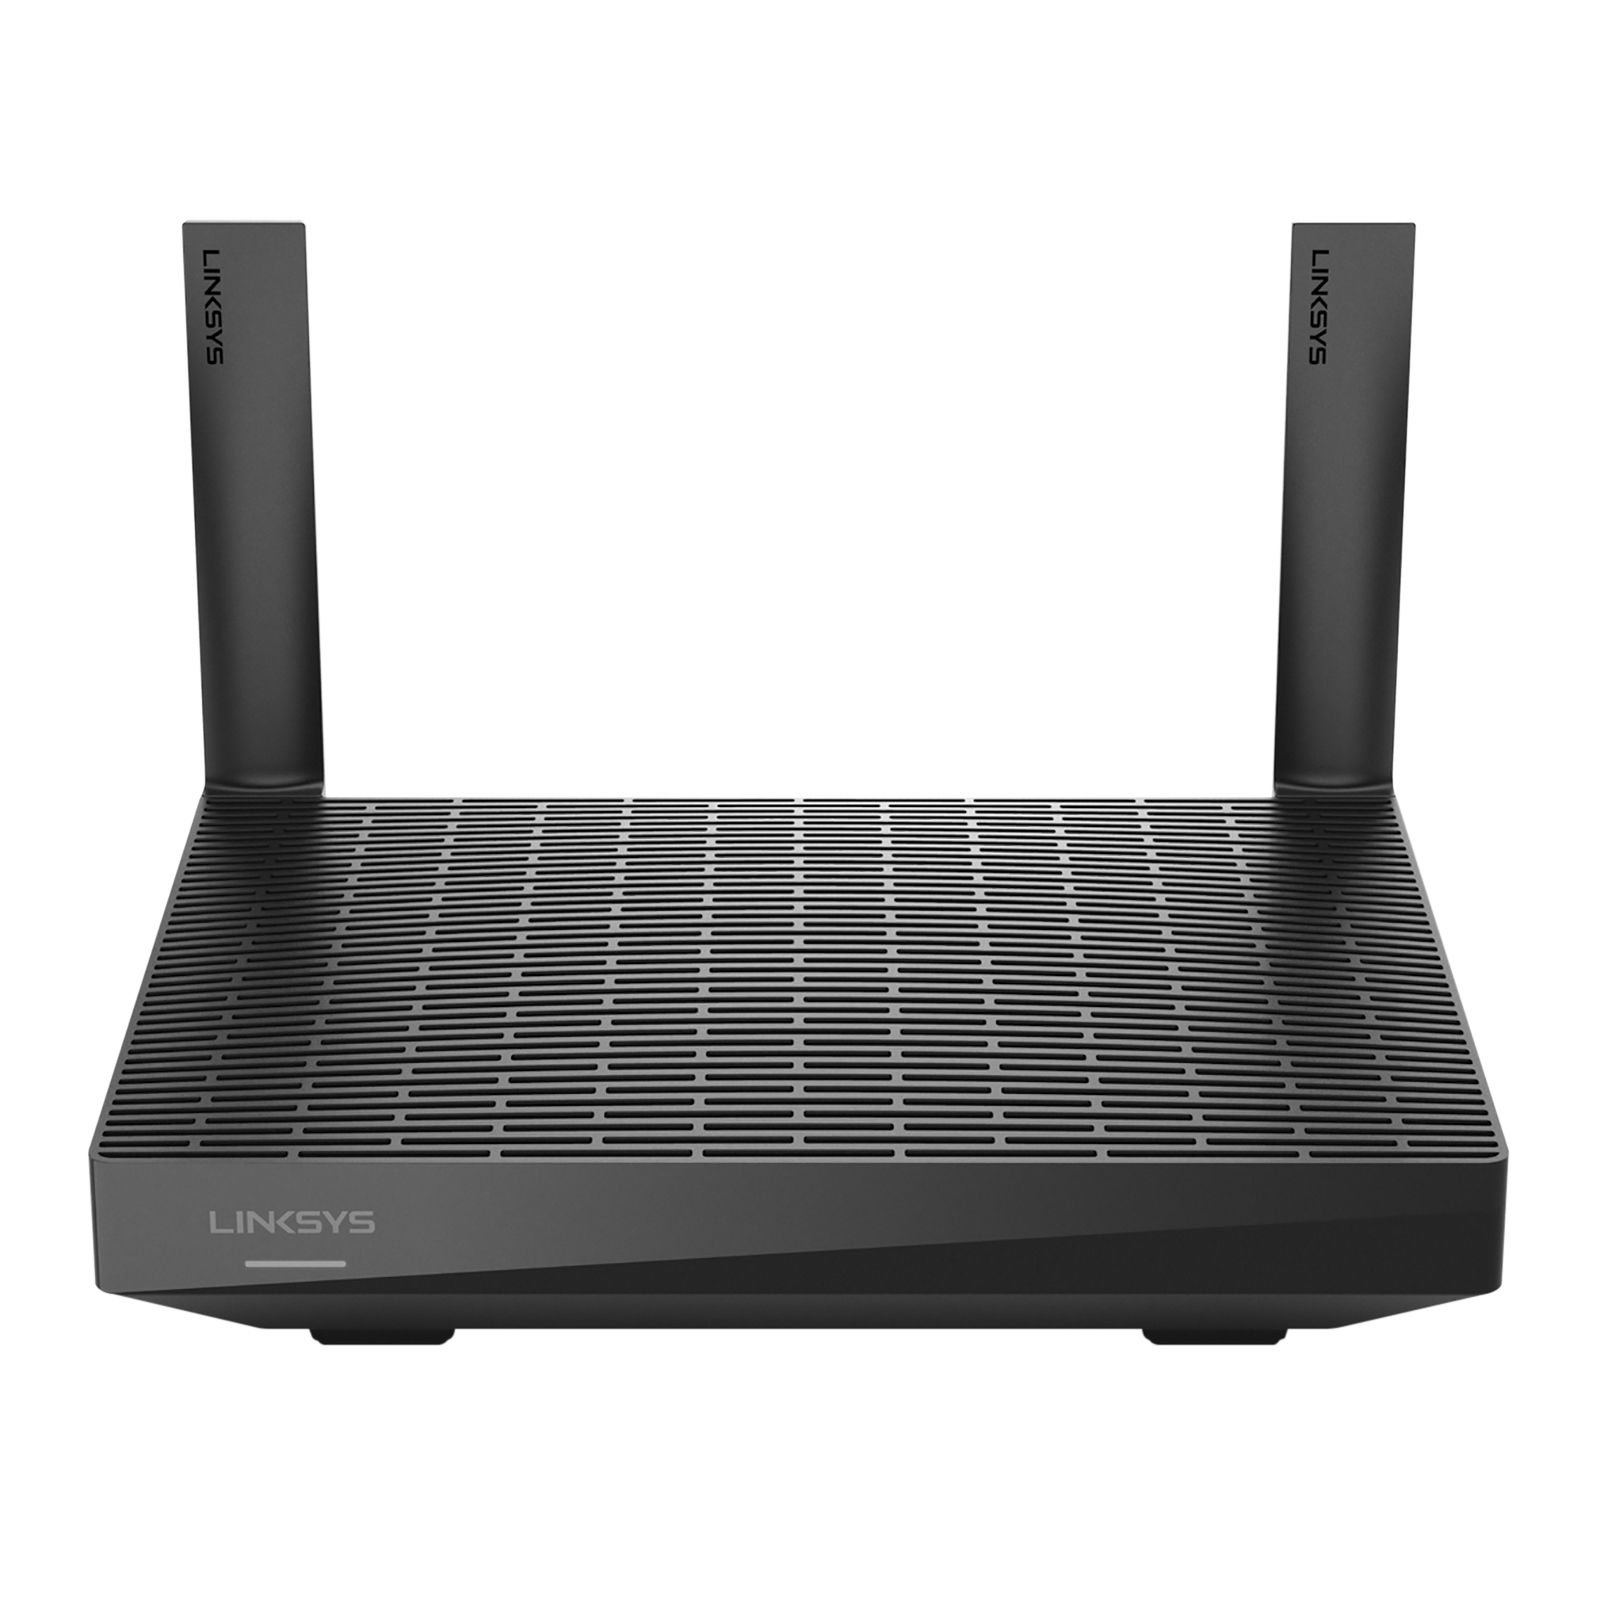 Linksys MR7340 Wi-Fi 6 Dual-Band Mesh Router